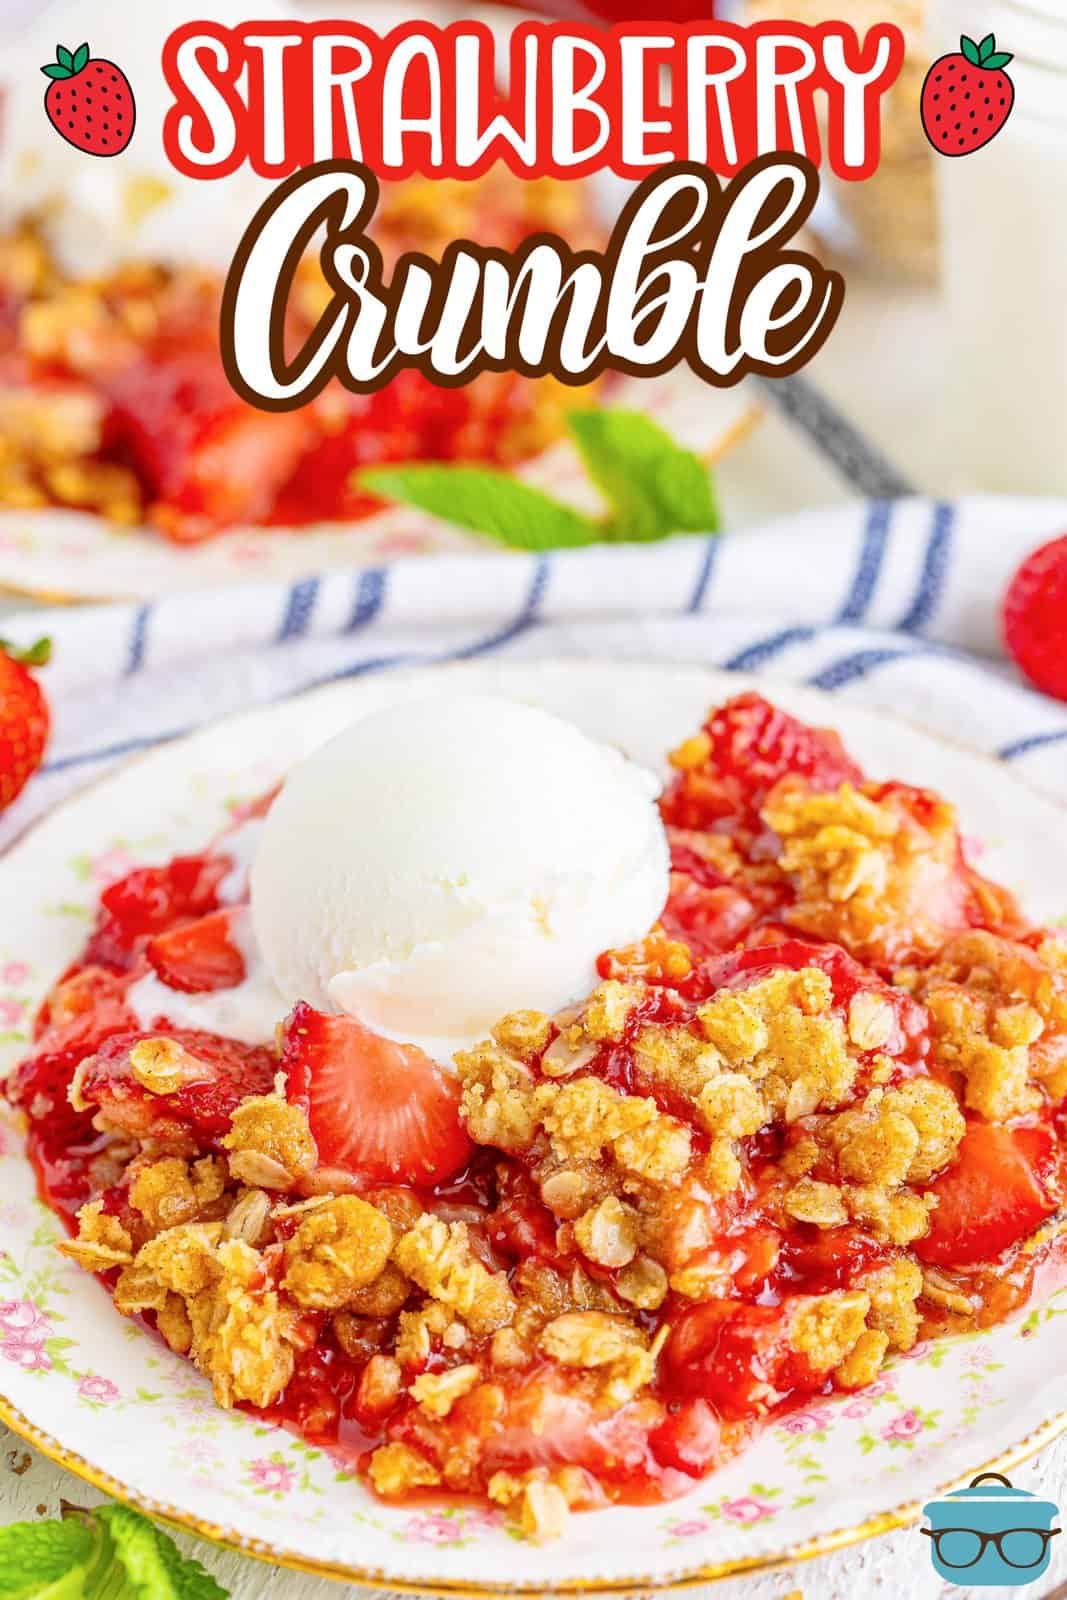 A plate of homemade strawberry crumble.